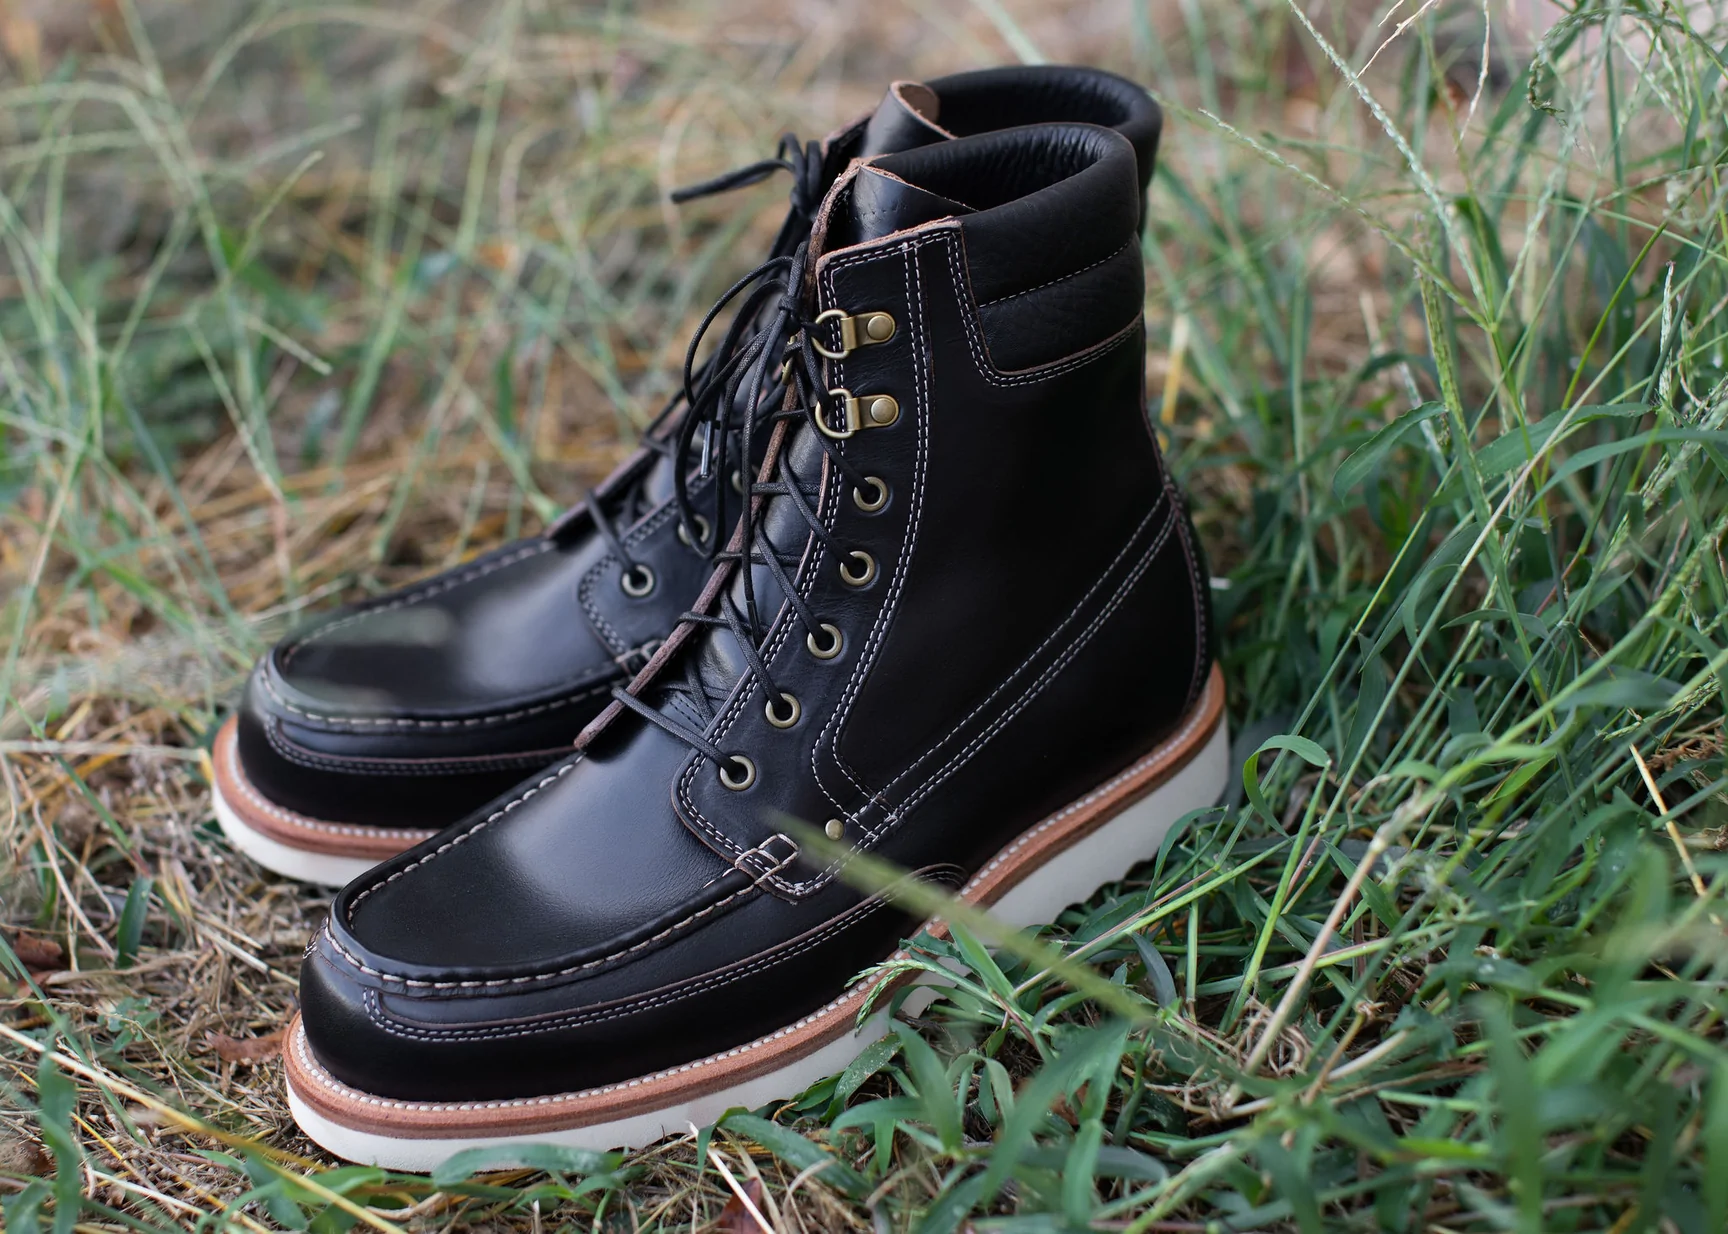 Shoes ‘n’ Boots of the Week: Grant Stone’s Field Boot Lands In Black ...